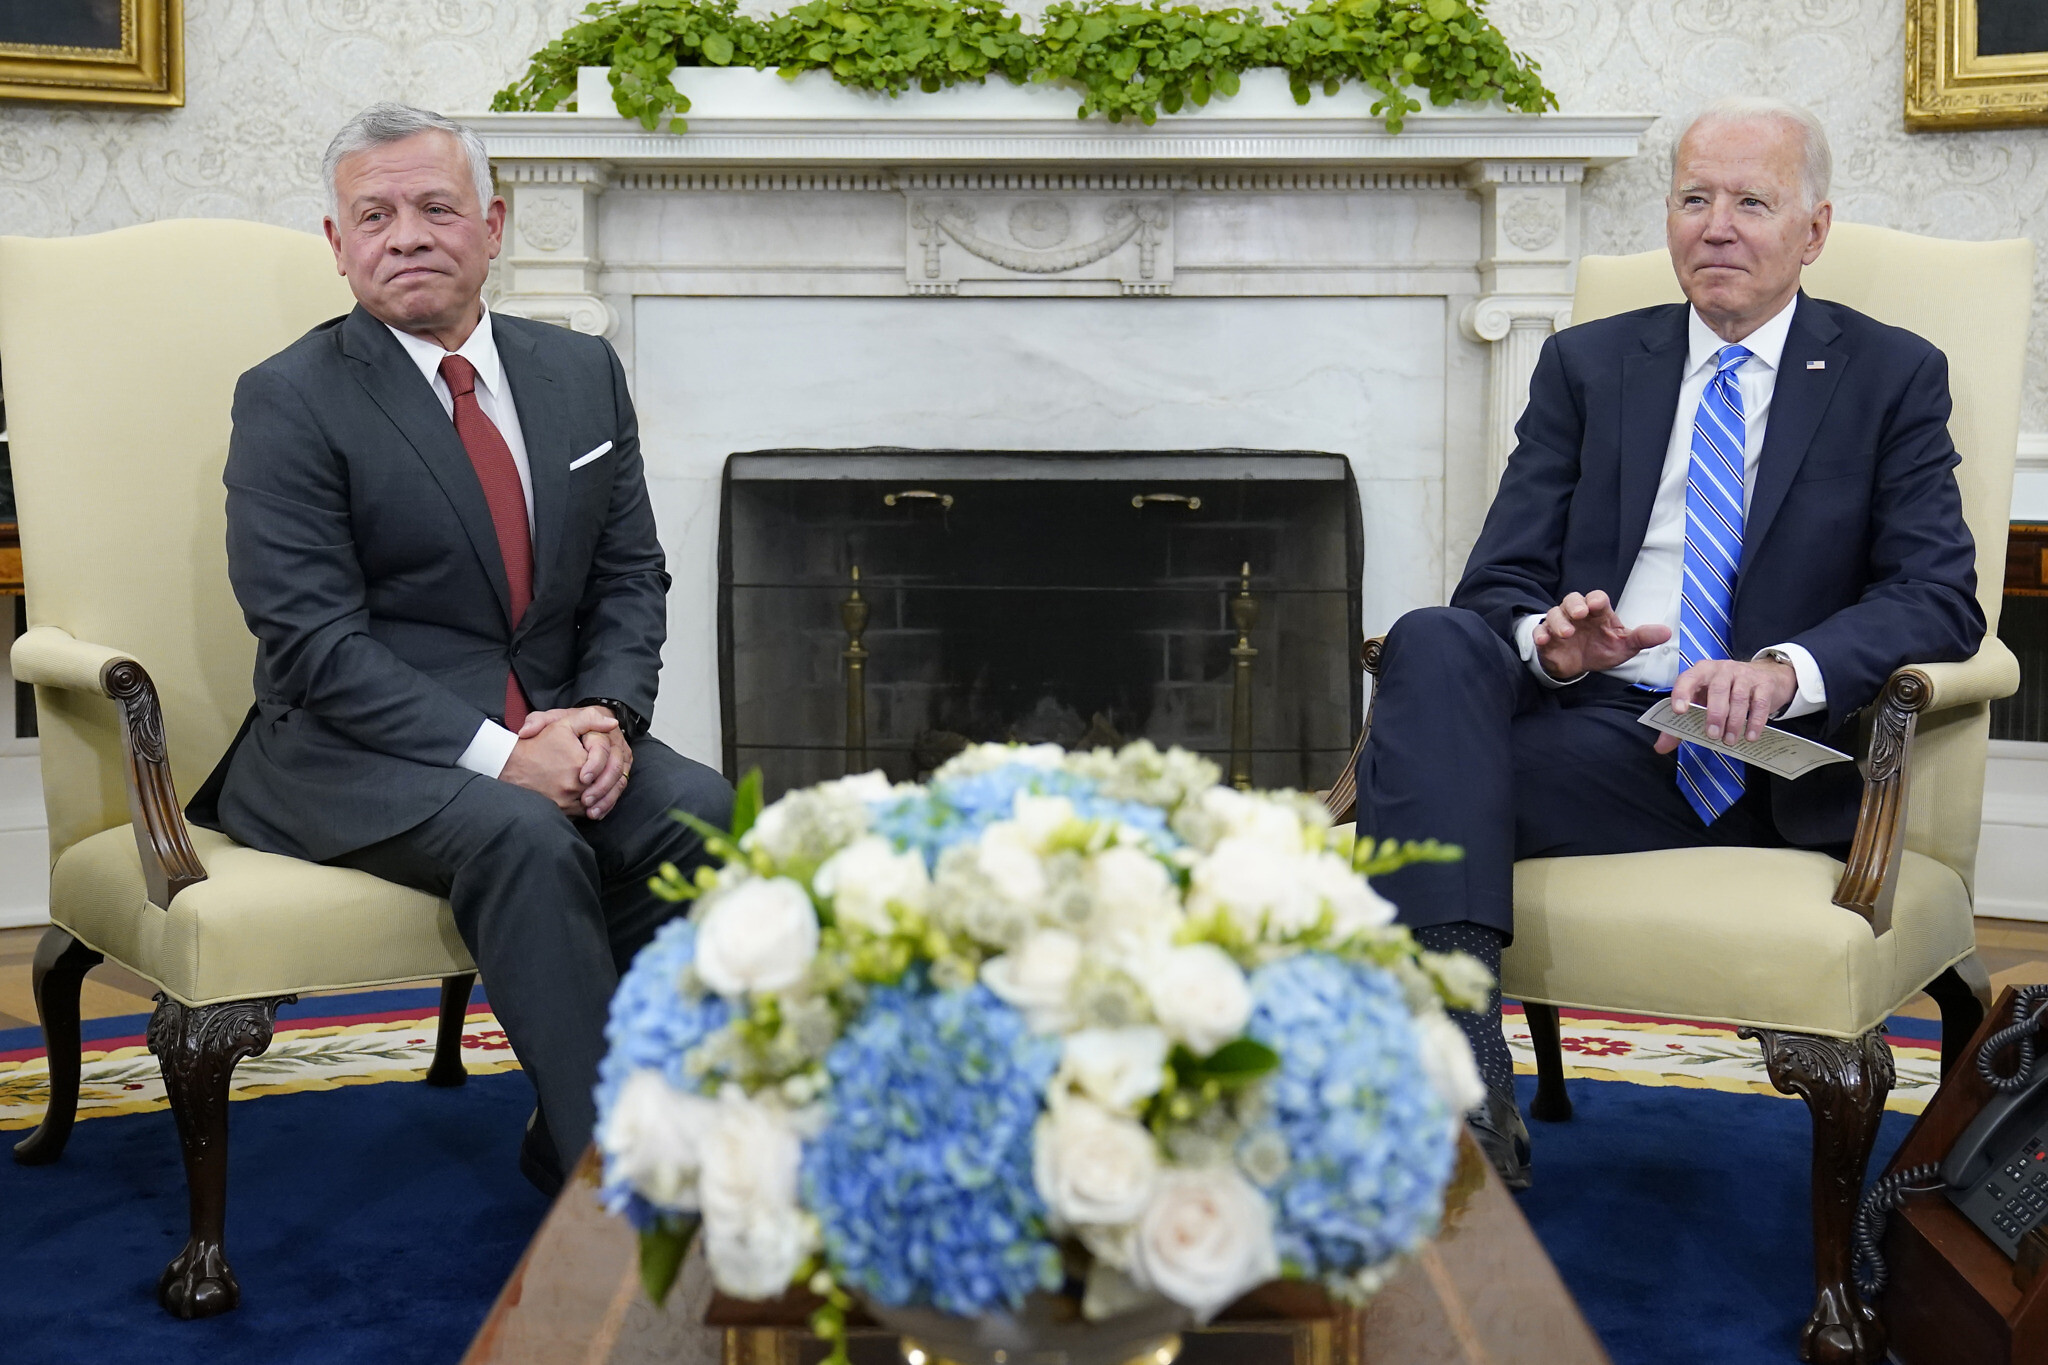 Jordanian king to meet Biden at White House amid Temple Mount tensions | The Times of Israel